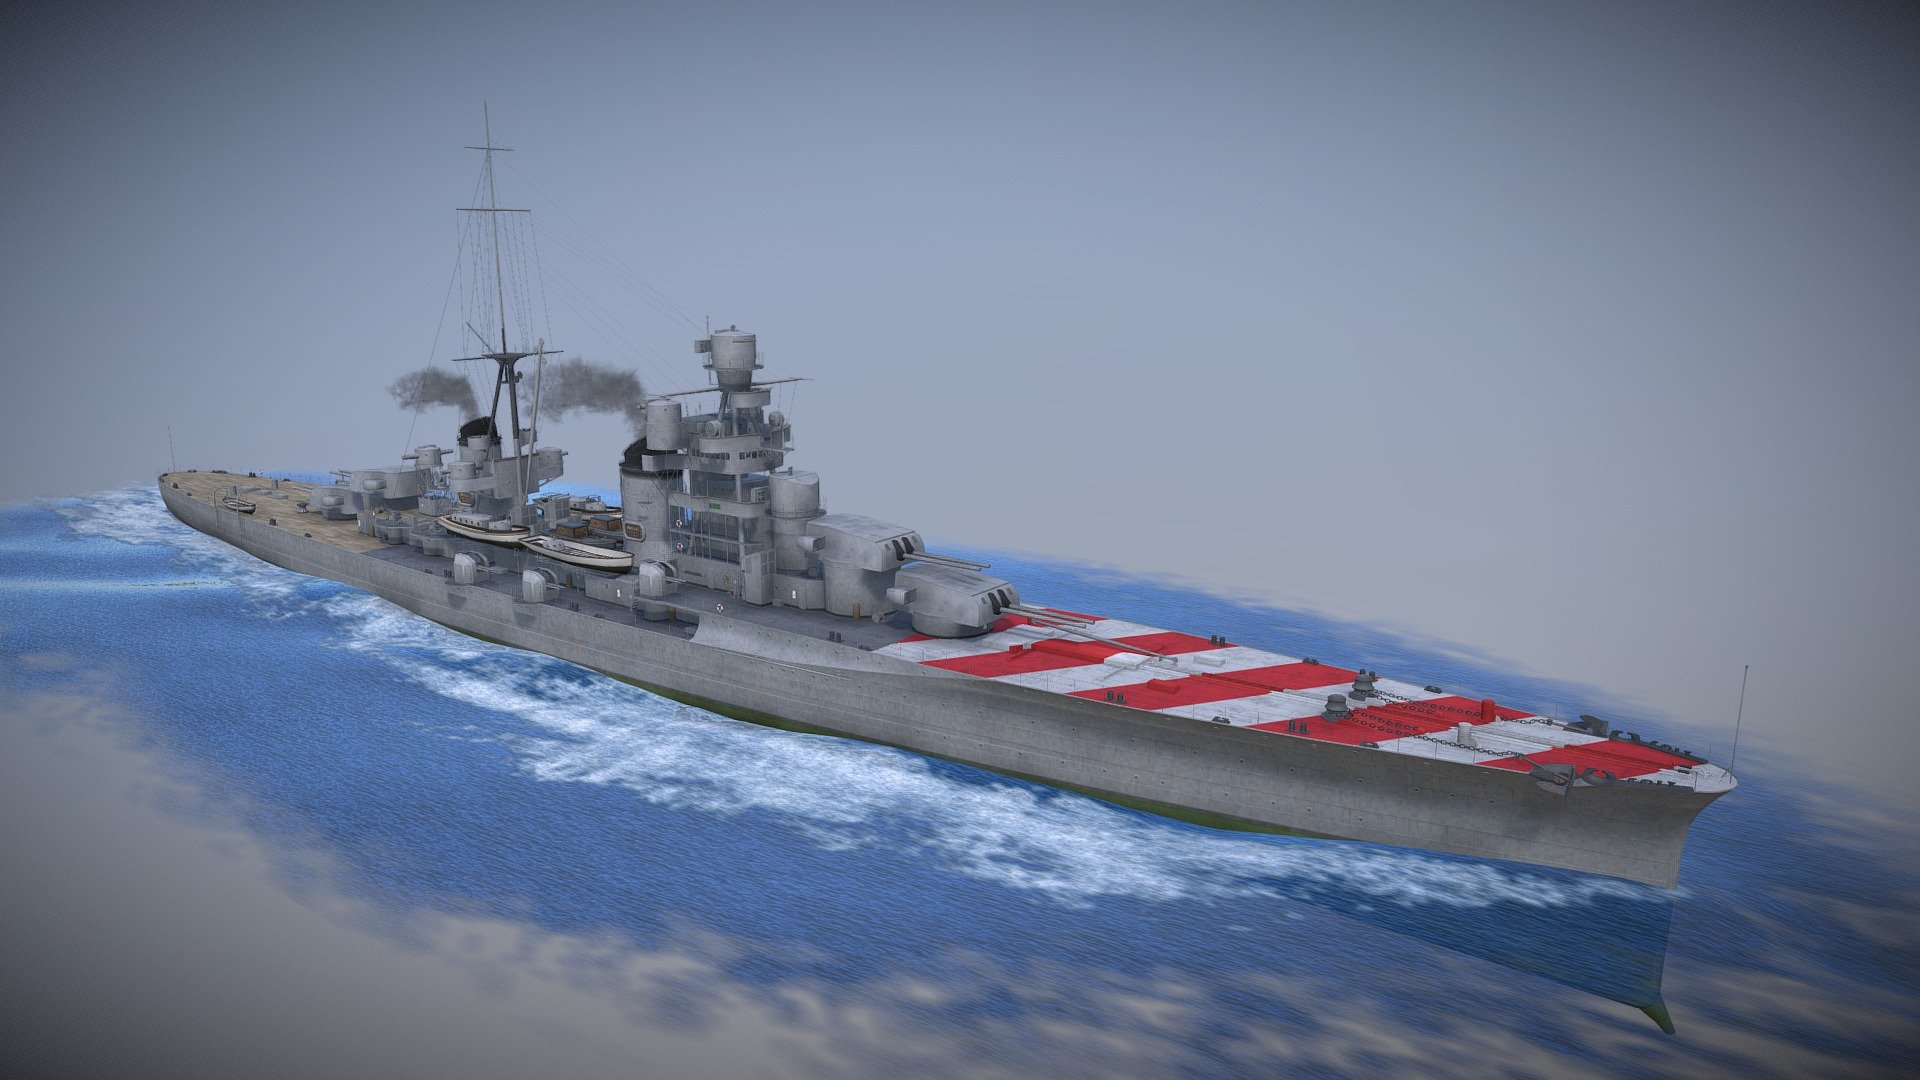 The Zara was a Zara-class heavy cruiser of the Italian Regia Marina during World War 2.
She was present during the  Battle of Calabria in July 1940, the Battle of Taranto in November 1940 and the Battle of Cape Matapan in March 1941 where she was sunk.

Additional renders can be viewed here: https://www.artstation.com/artwork/ykyQq5 - Zara - Buy Royalty Free 3D model by ThomasBeerens 3d model